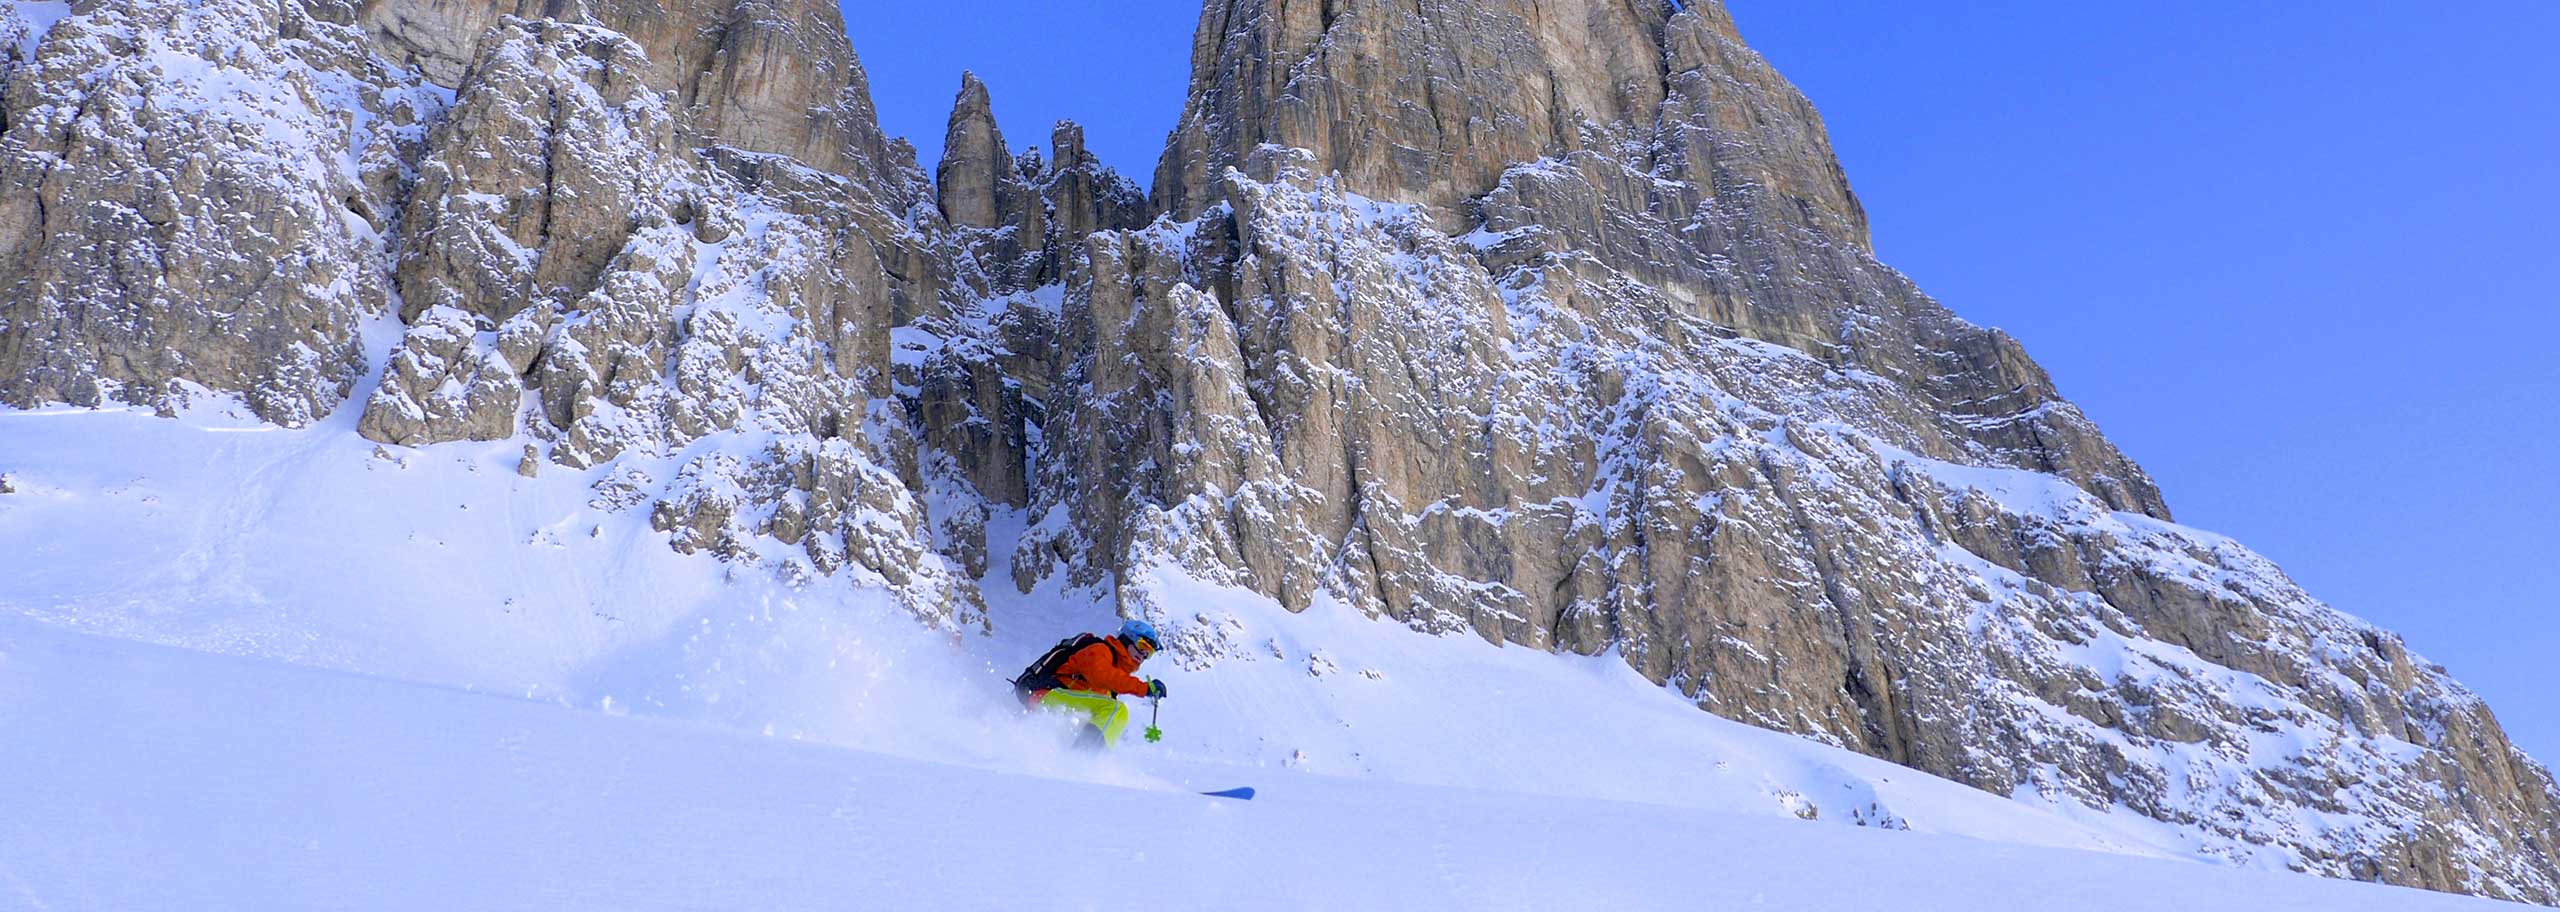 Off-piste Skiing with a Mountain Guide in the Alpe di Siusi